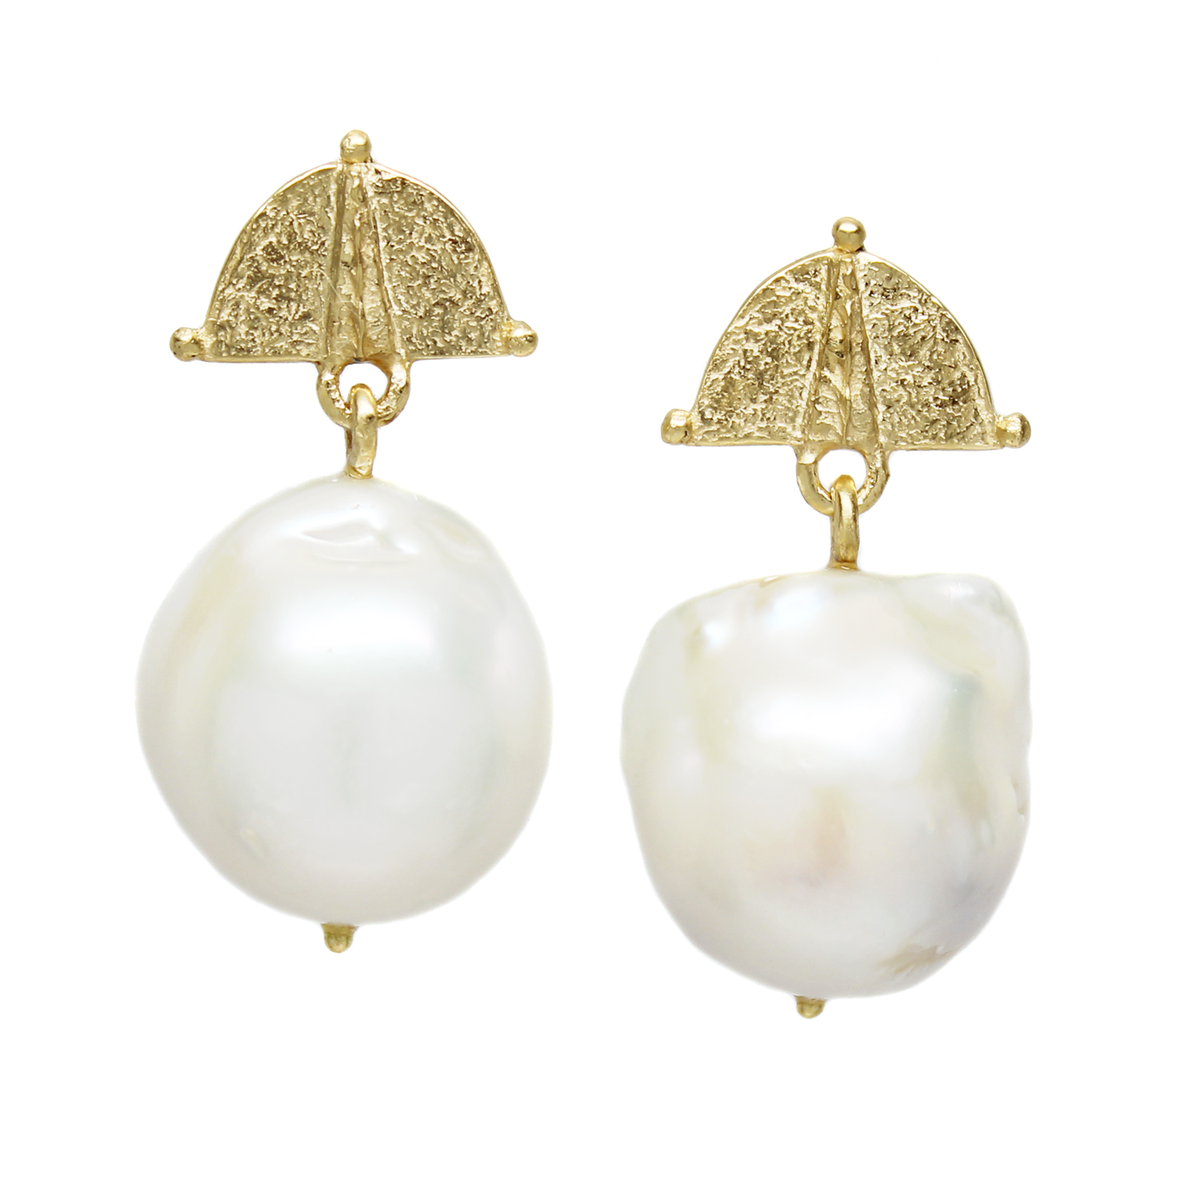 One-of-a-Kind Dotted and Ridged Semi Circle Topped Pearl Drops